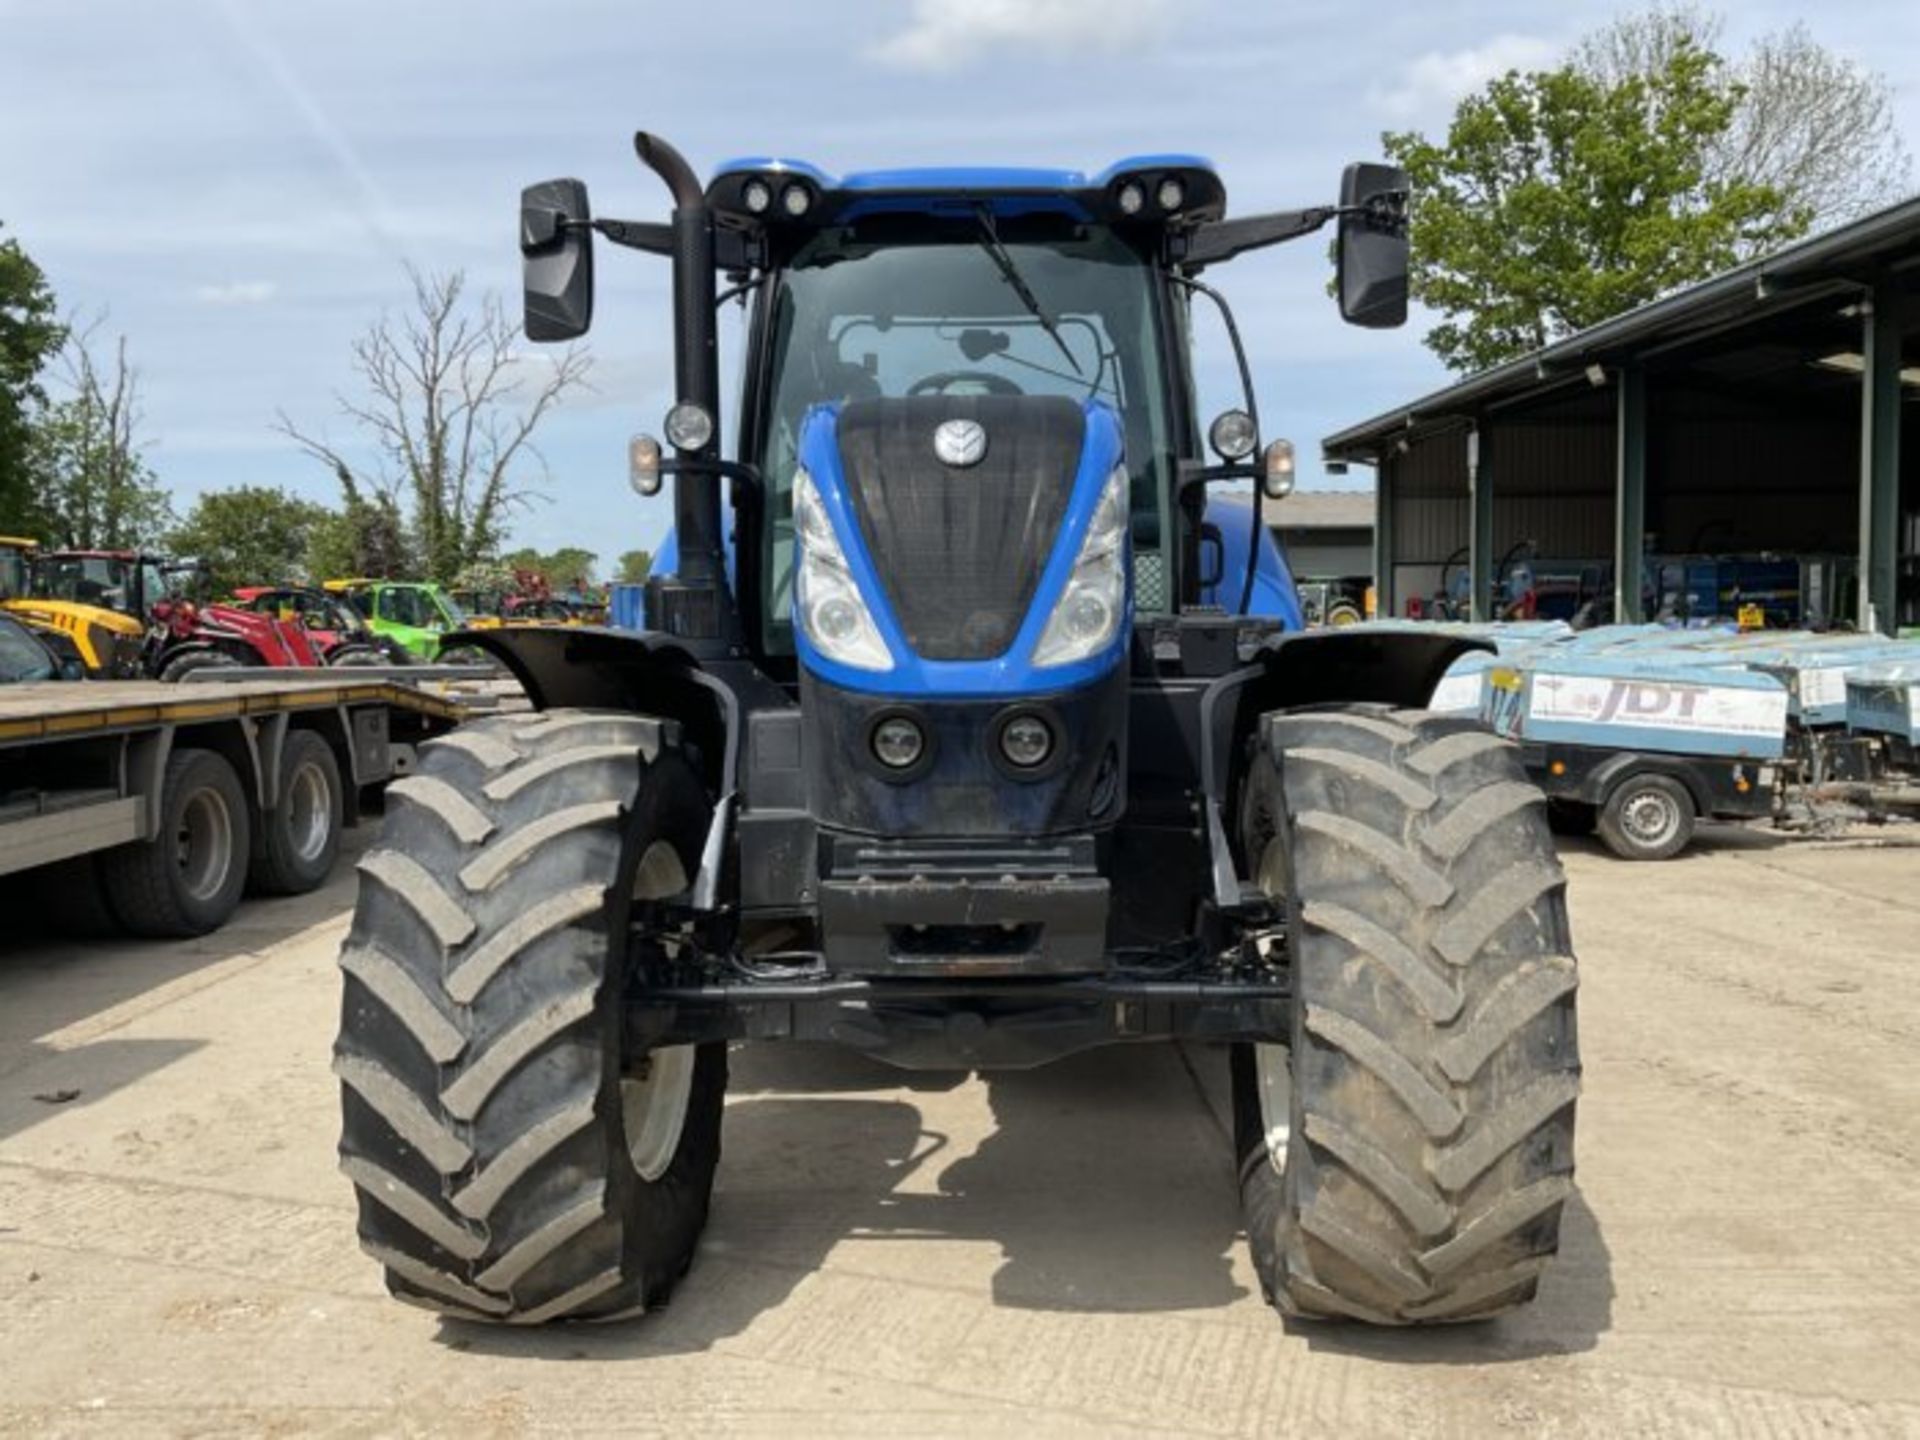 NEW HOLLAND T7.210 4033 HOURS. 2020 – 20 REG. - Image 10 of 11